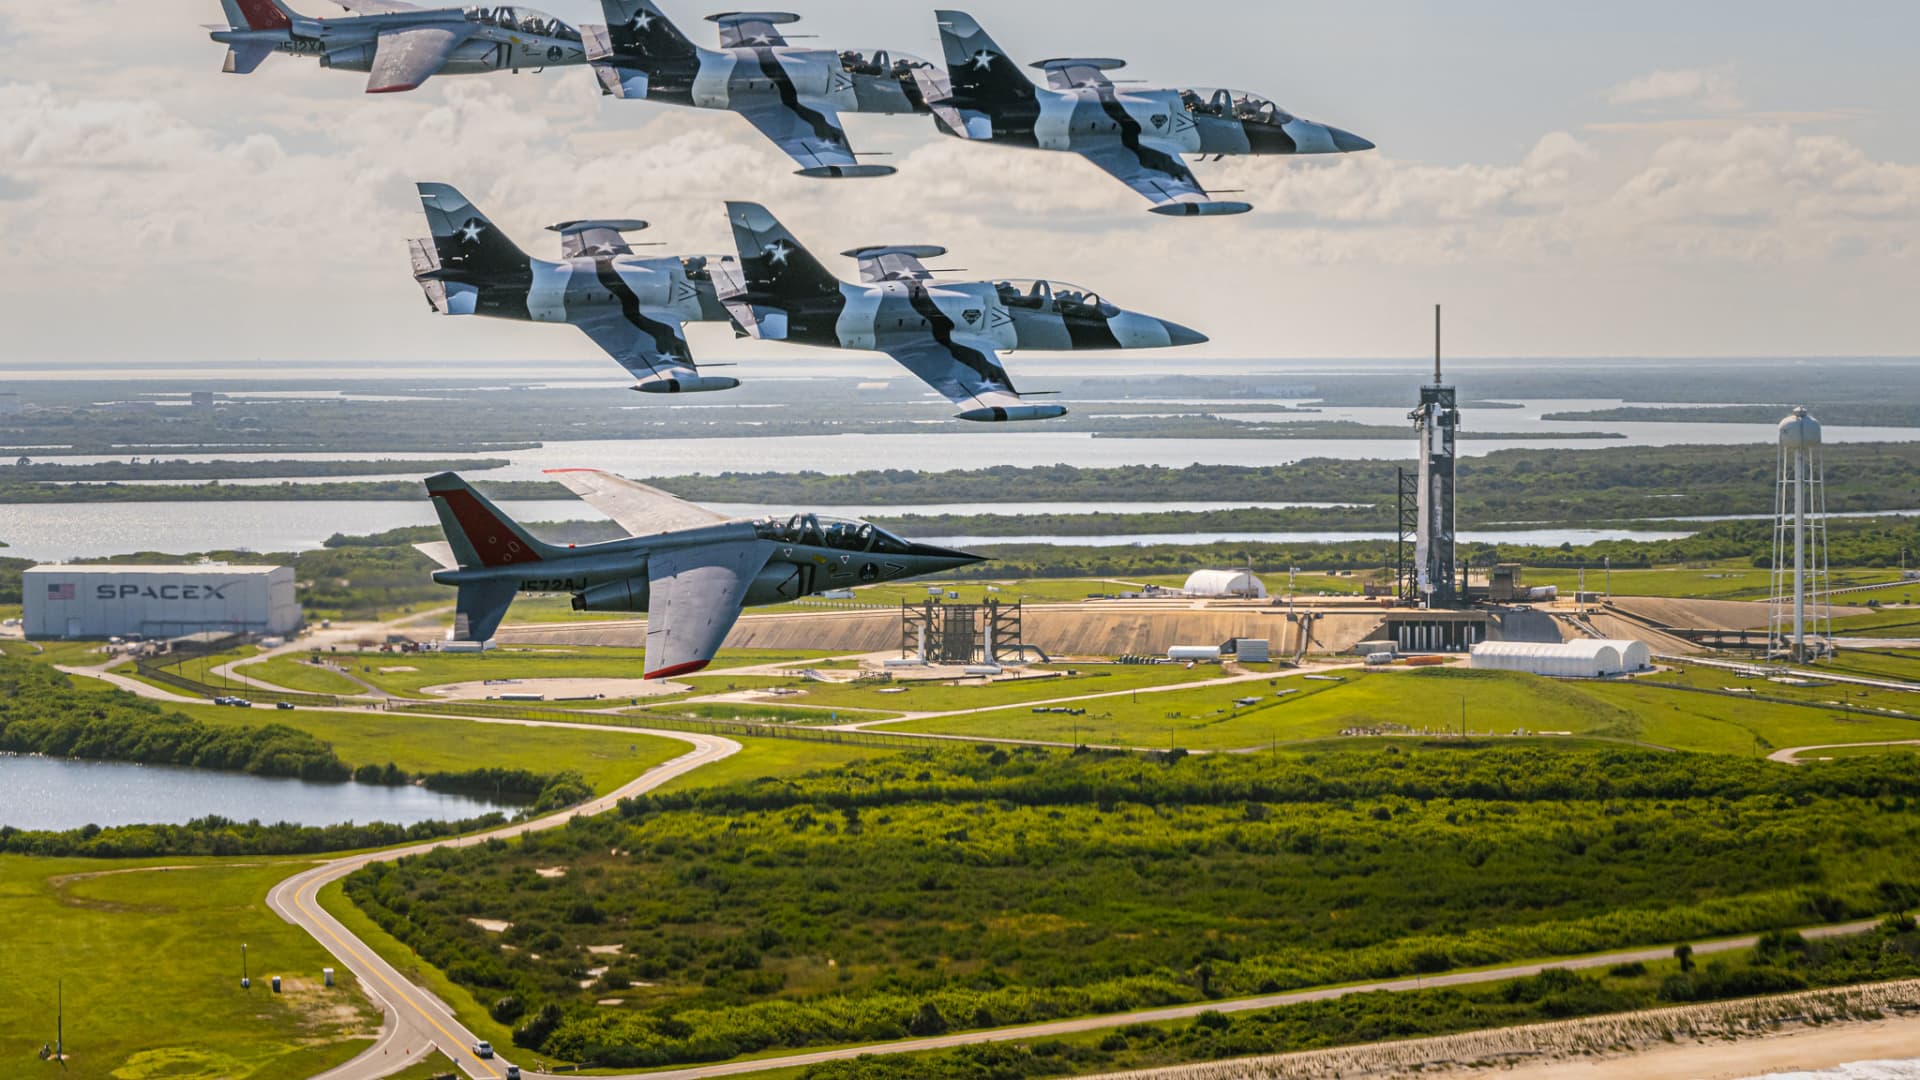 The Inspiration4 crew flies over Launch Complex 39A at NASA's Kennedy Space Center on September 13, 2021.